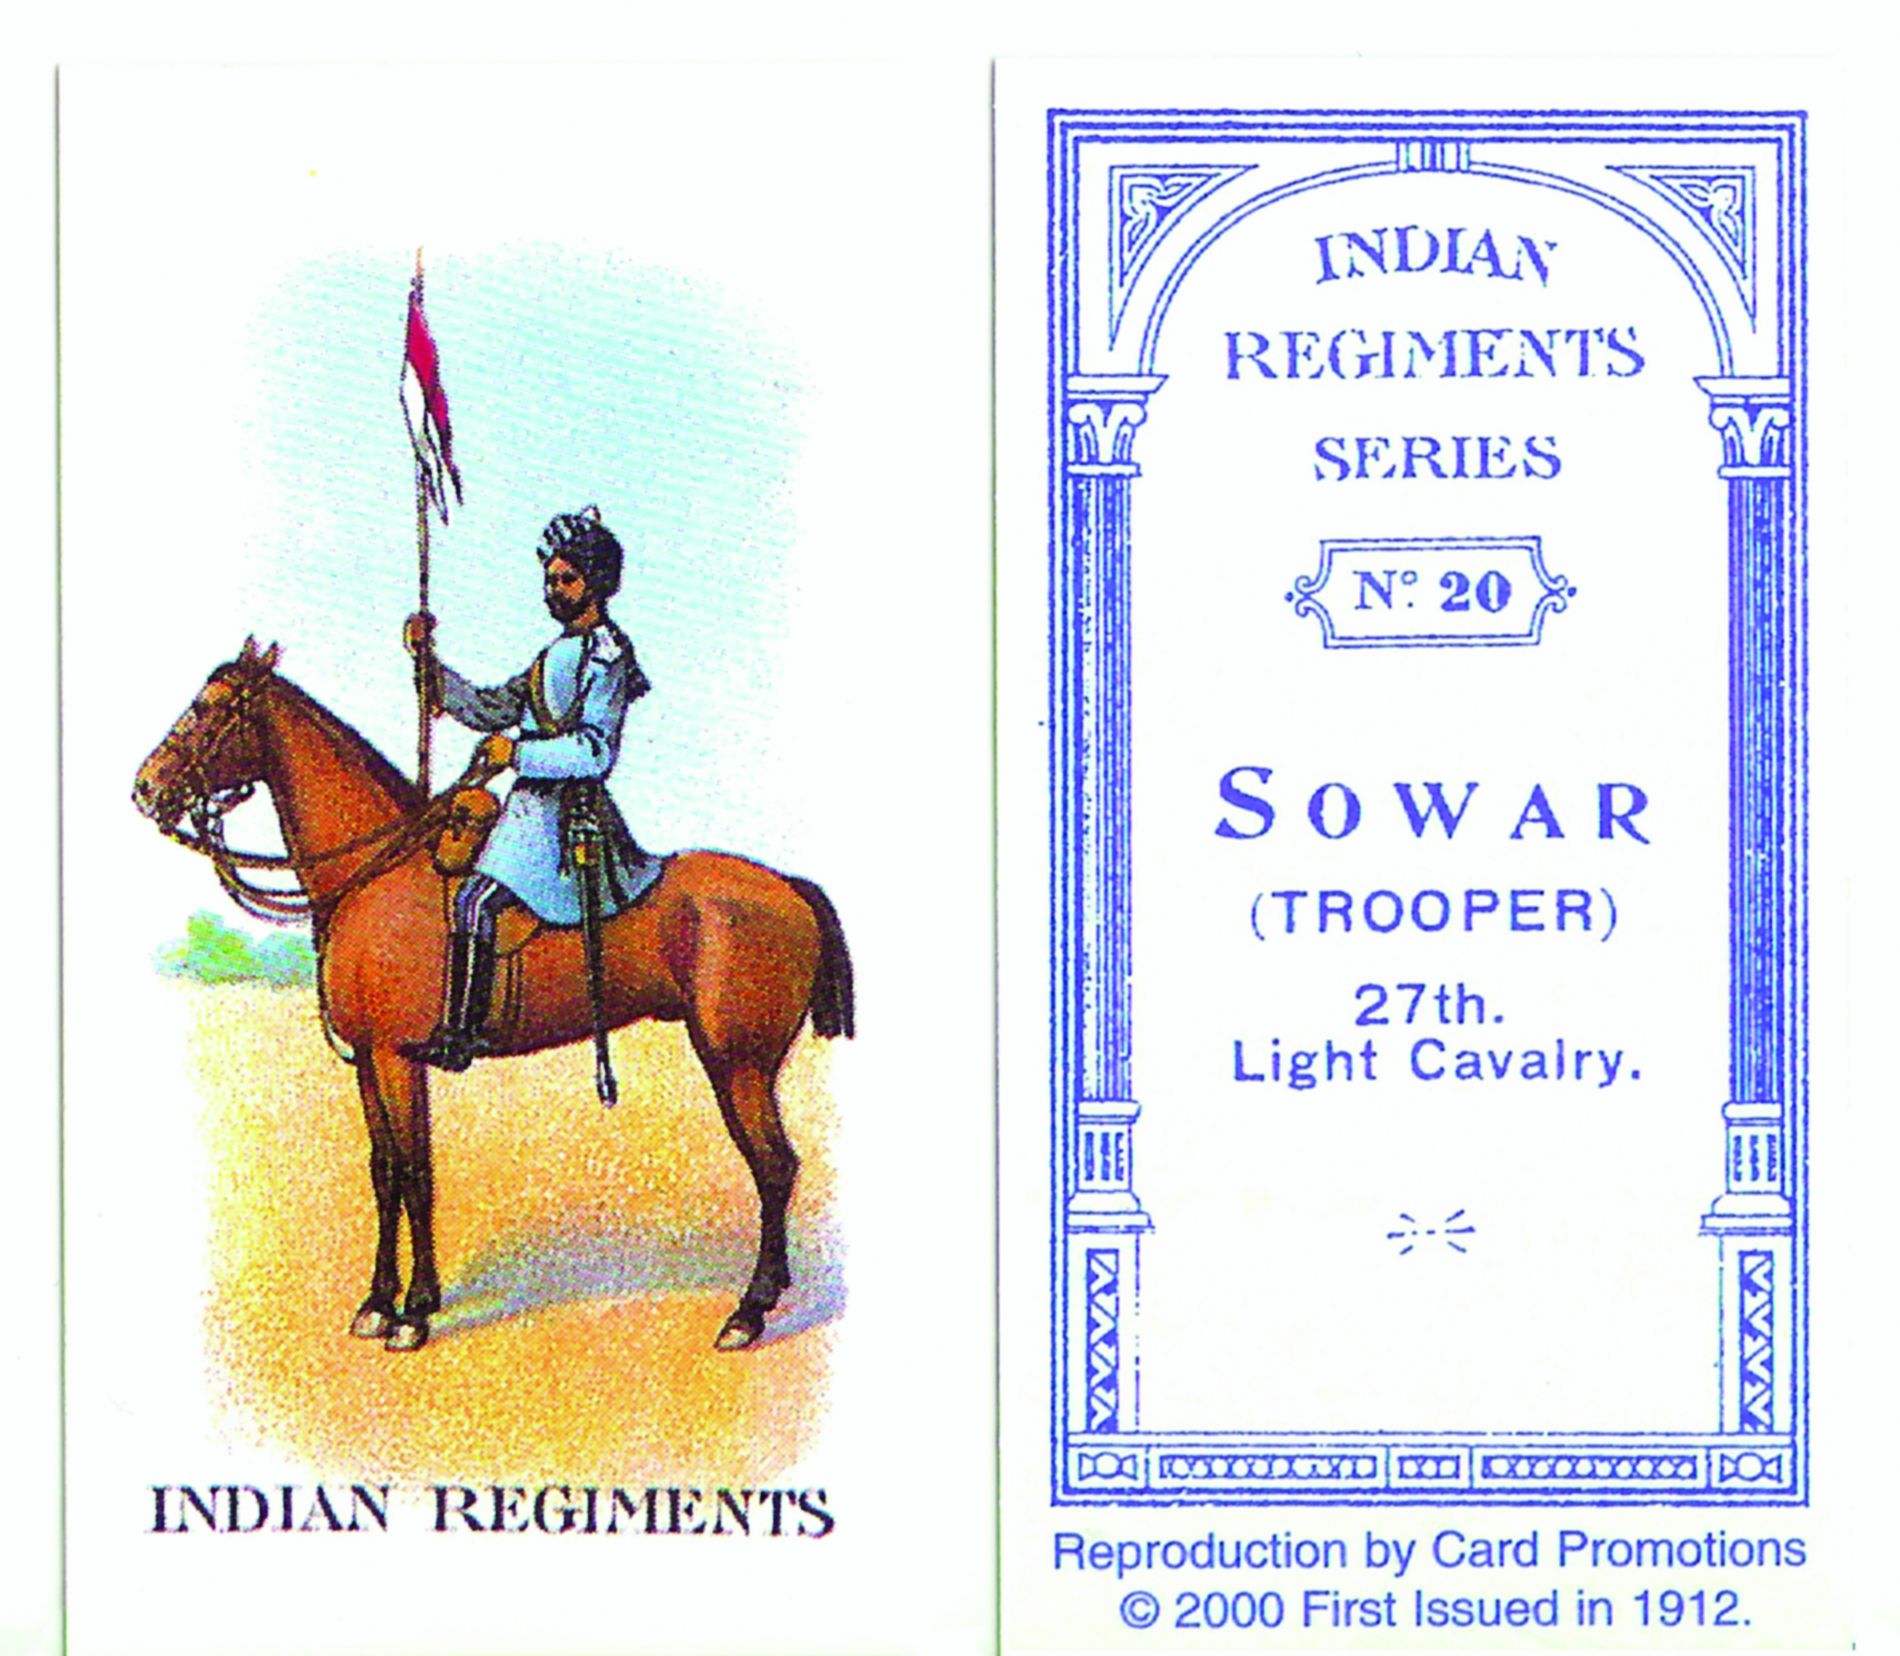 A modern reprint of a card originally dating to 1912, which was part of a series of 50 cards on the Indian Regiments. These reprints never appeared in packages of tobacco and lack some of the finer detail of the originals.